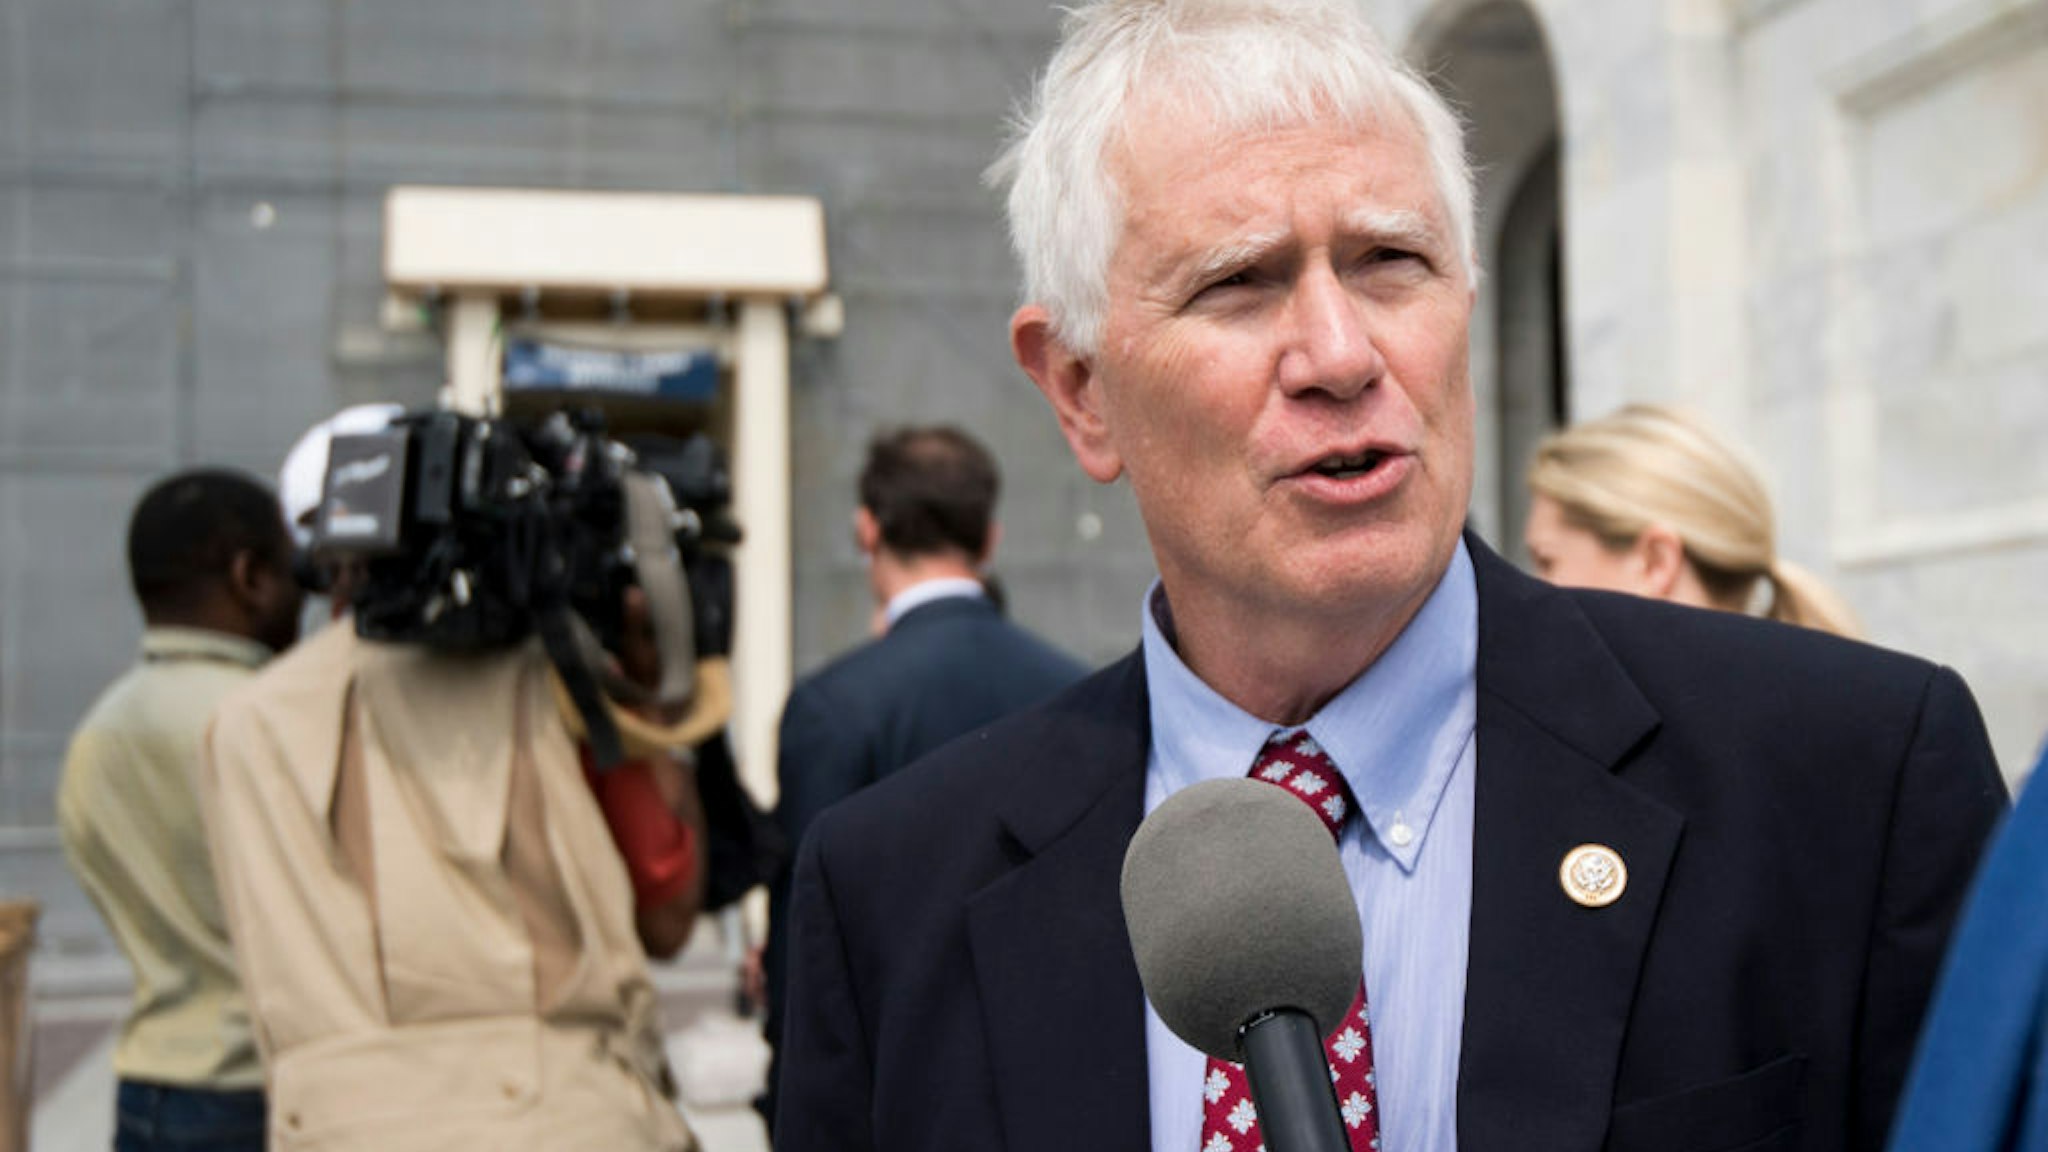 UNITED STATES - JUNE 5: Rep. Mo Brooks, R-Ala., speaks with a reporter as he leaves the Capitol after the final vote of the week on Wednesday, June 5, 2019. (Photo By Bill Clark/CQ Roll Call)